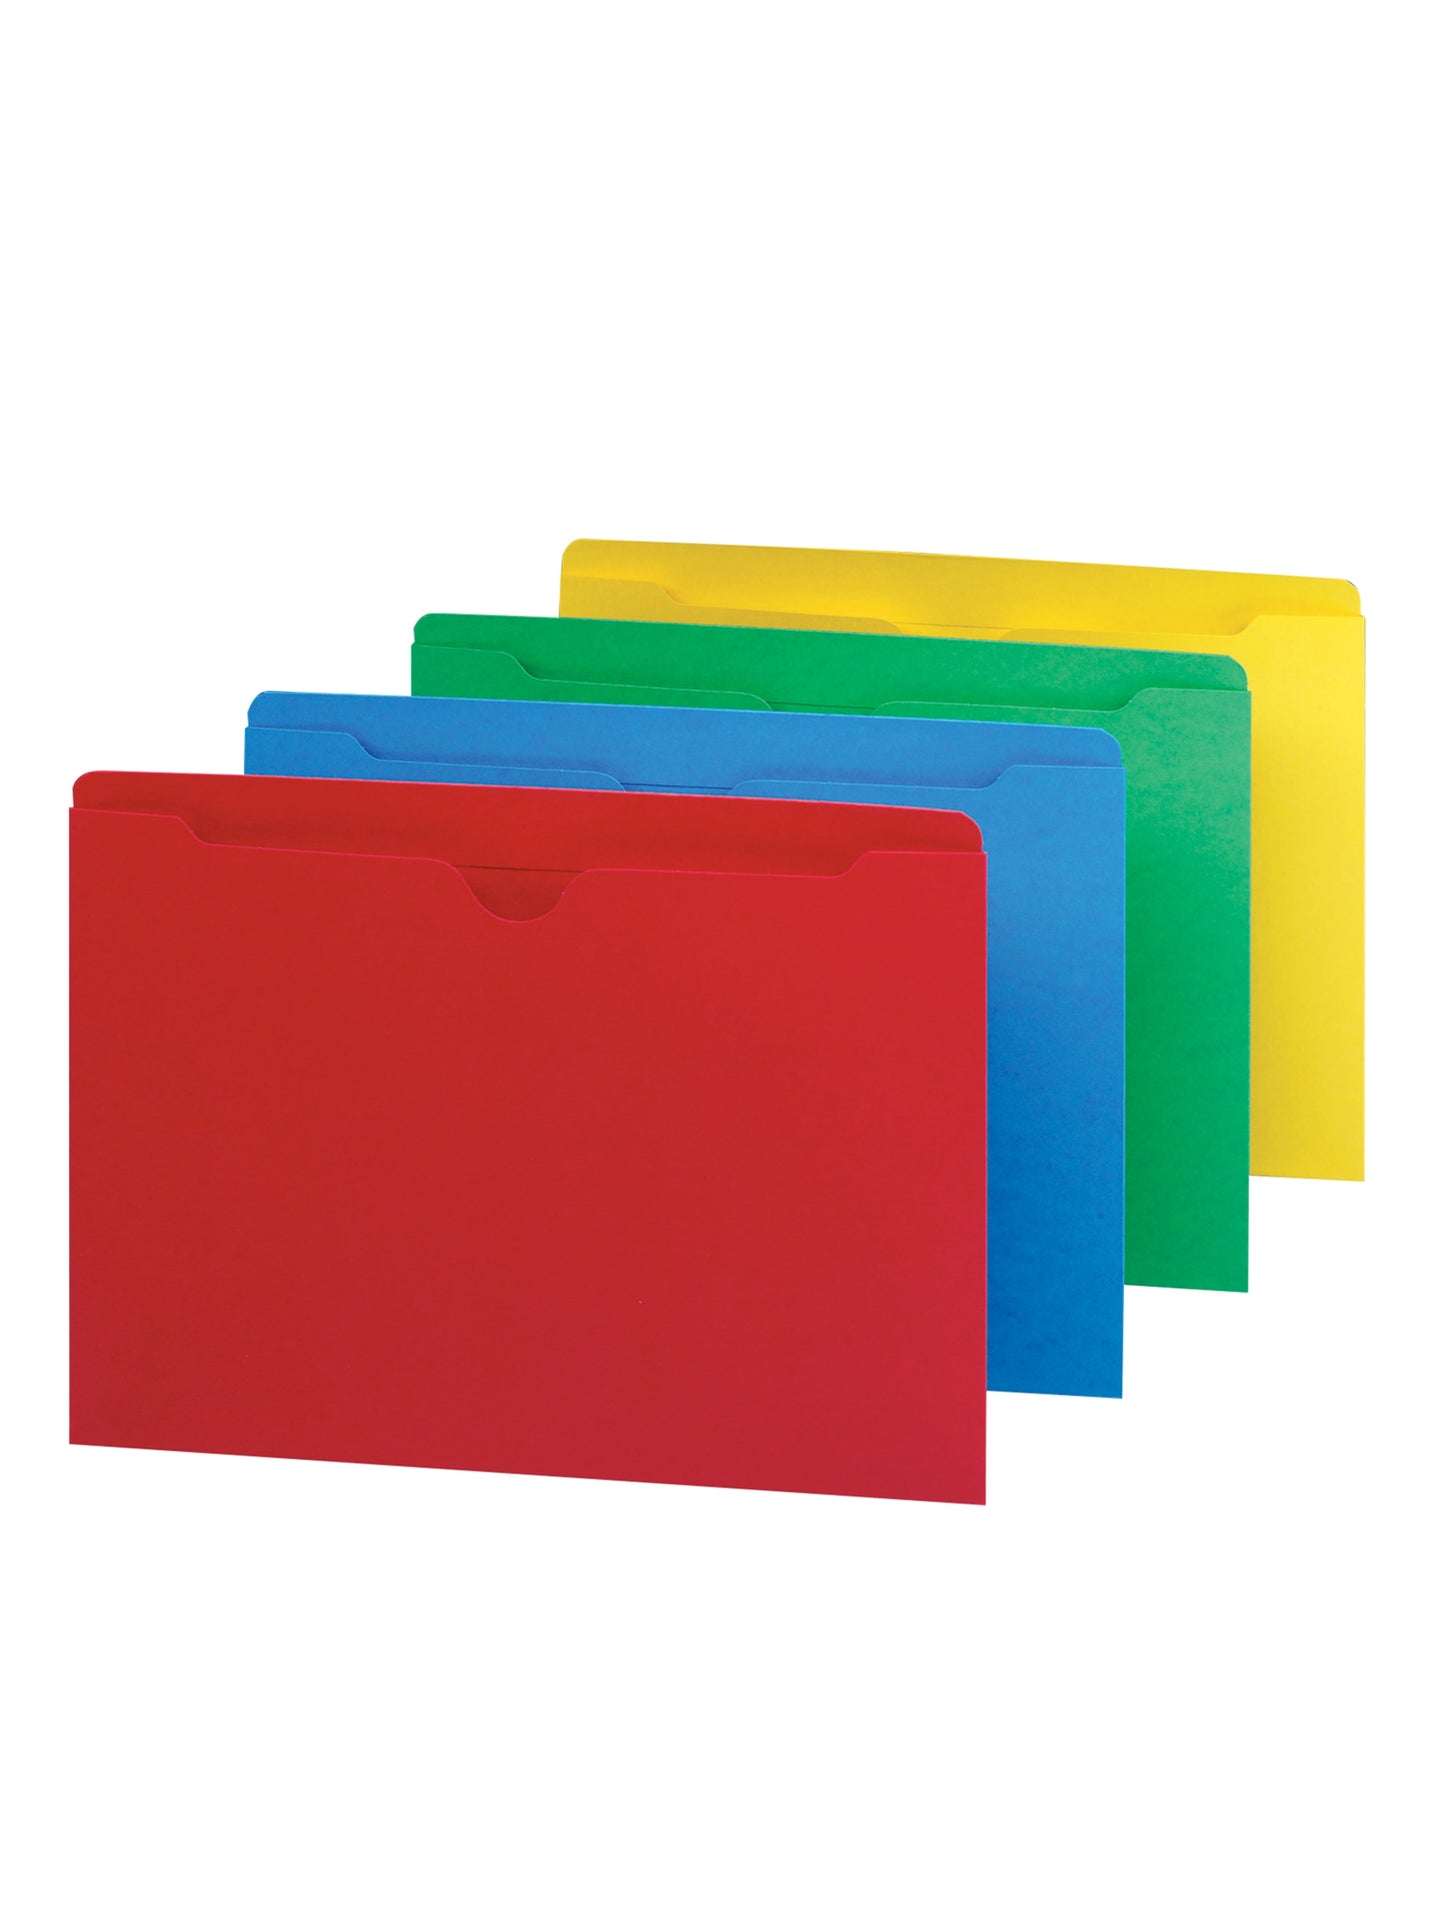 Colored File Jackets, Reinforced Straight-Cut Tab, No Expansion, Assorted Primaries Color, Letter Size, Set of 0, 30086486756137